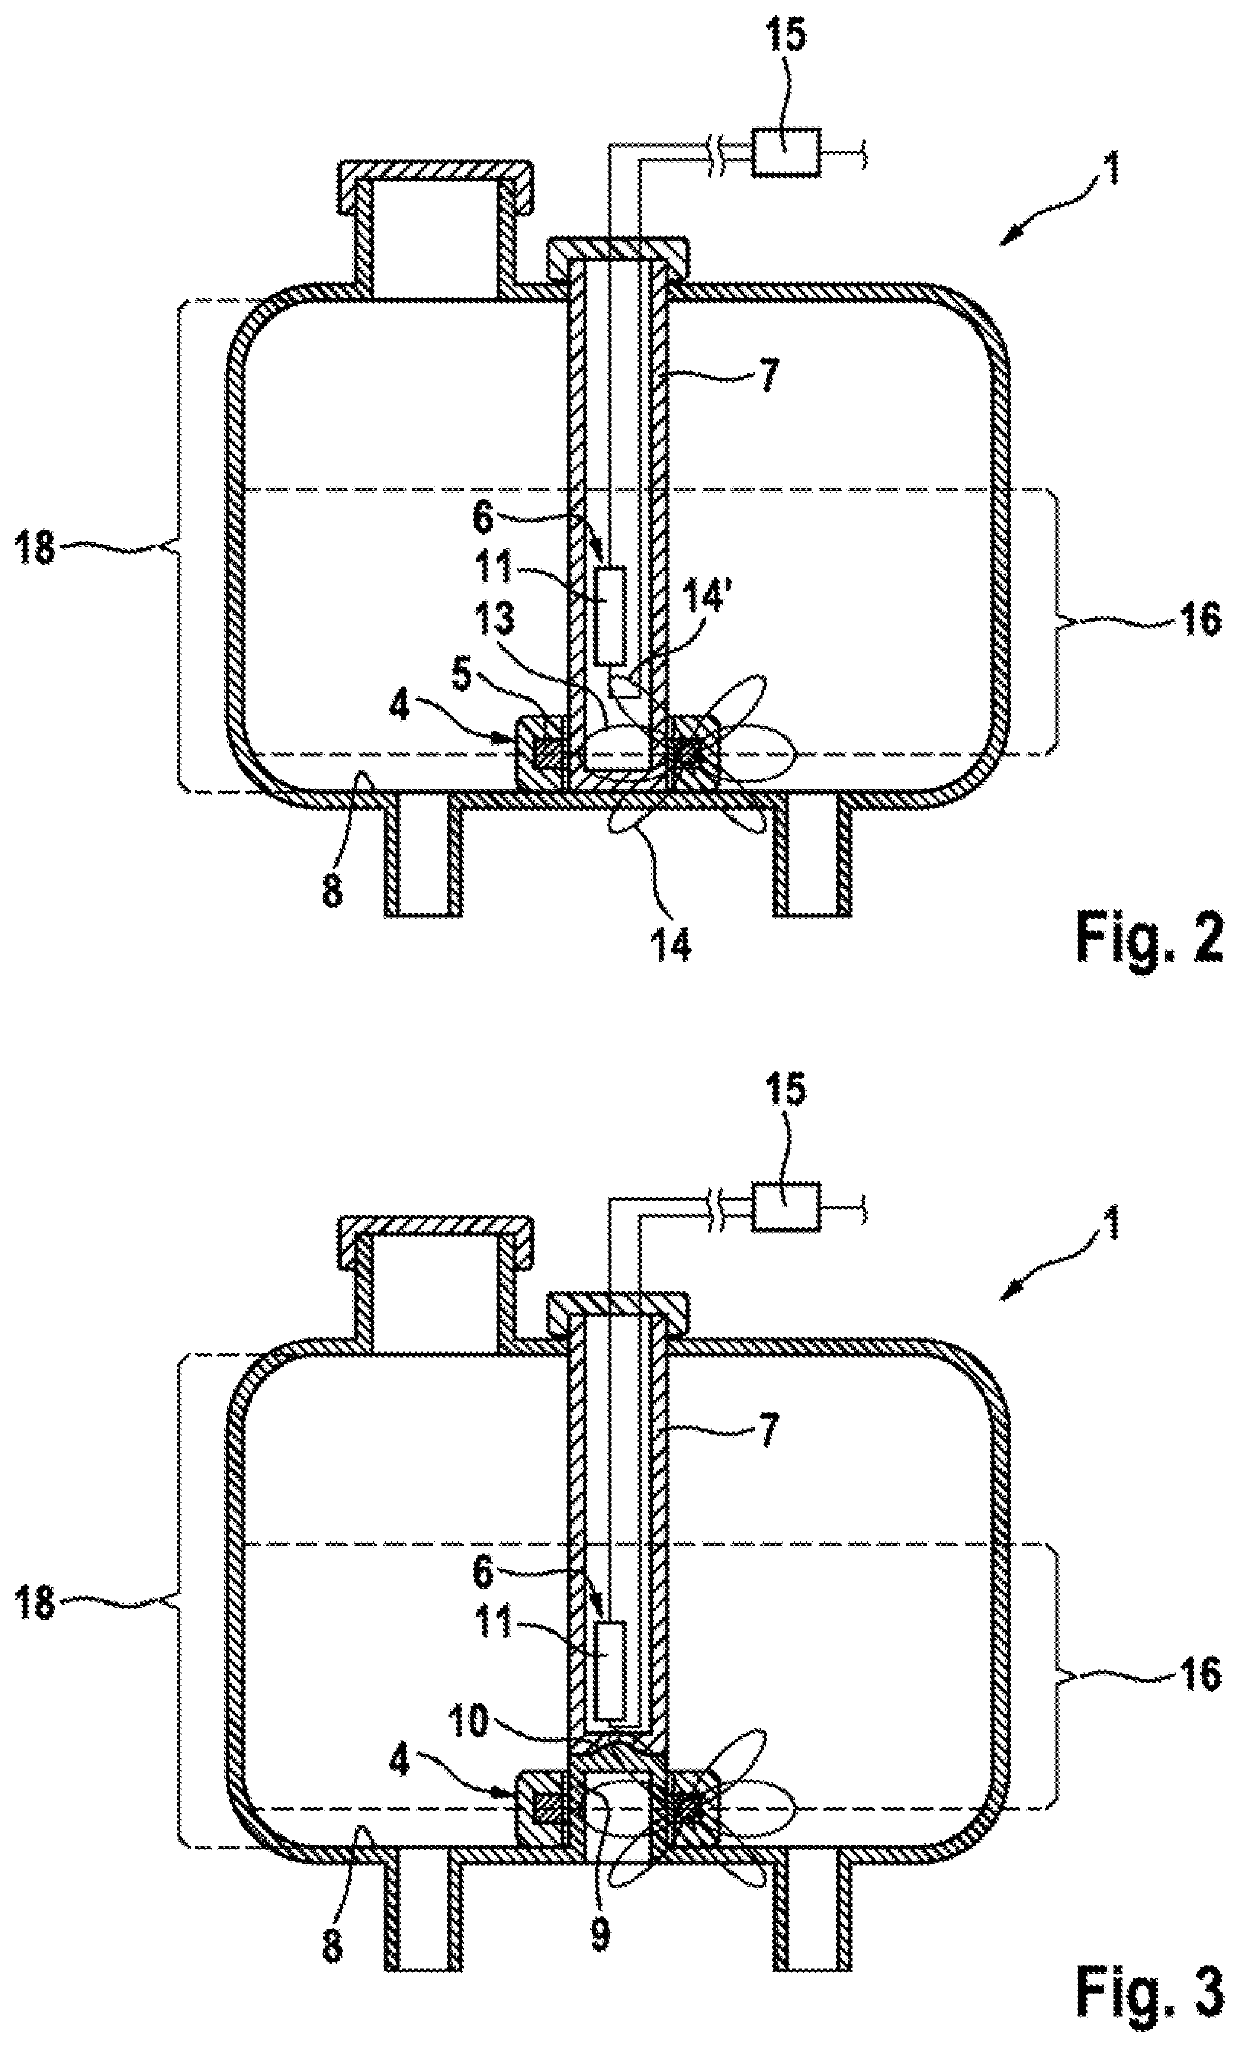 Fluid container having a device for fill level monitoring